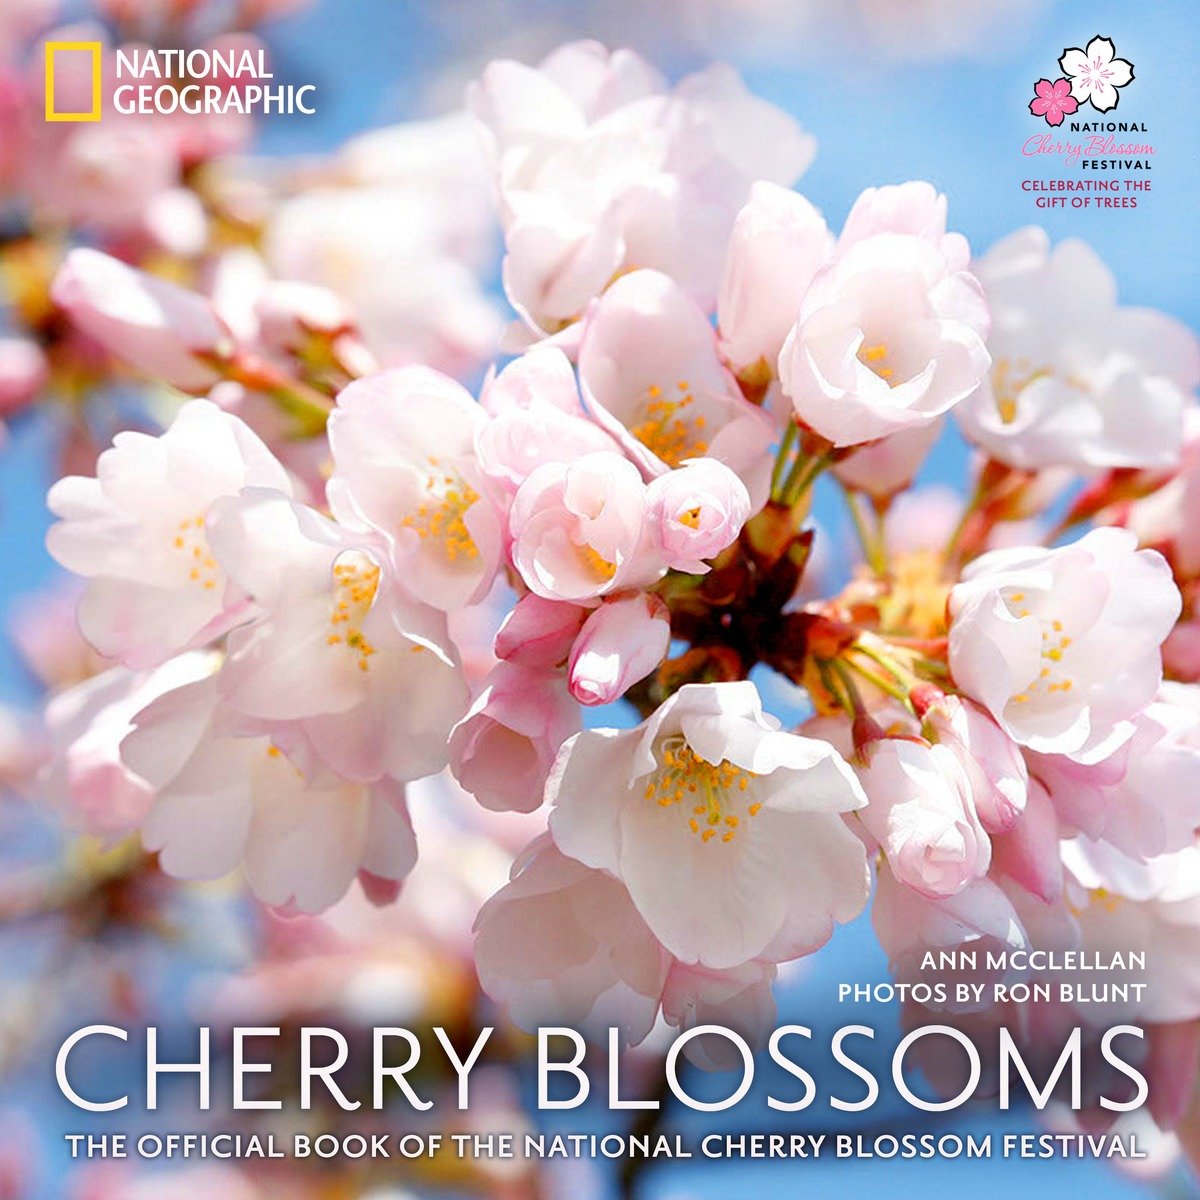 Cherry Blossoms (Hardcover Book)